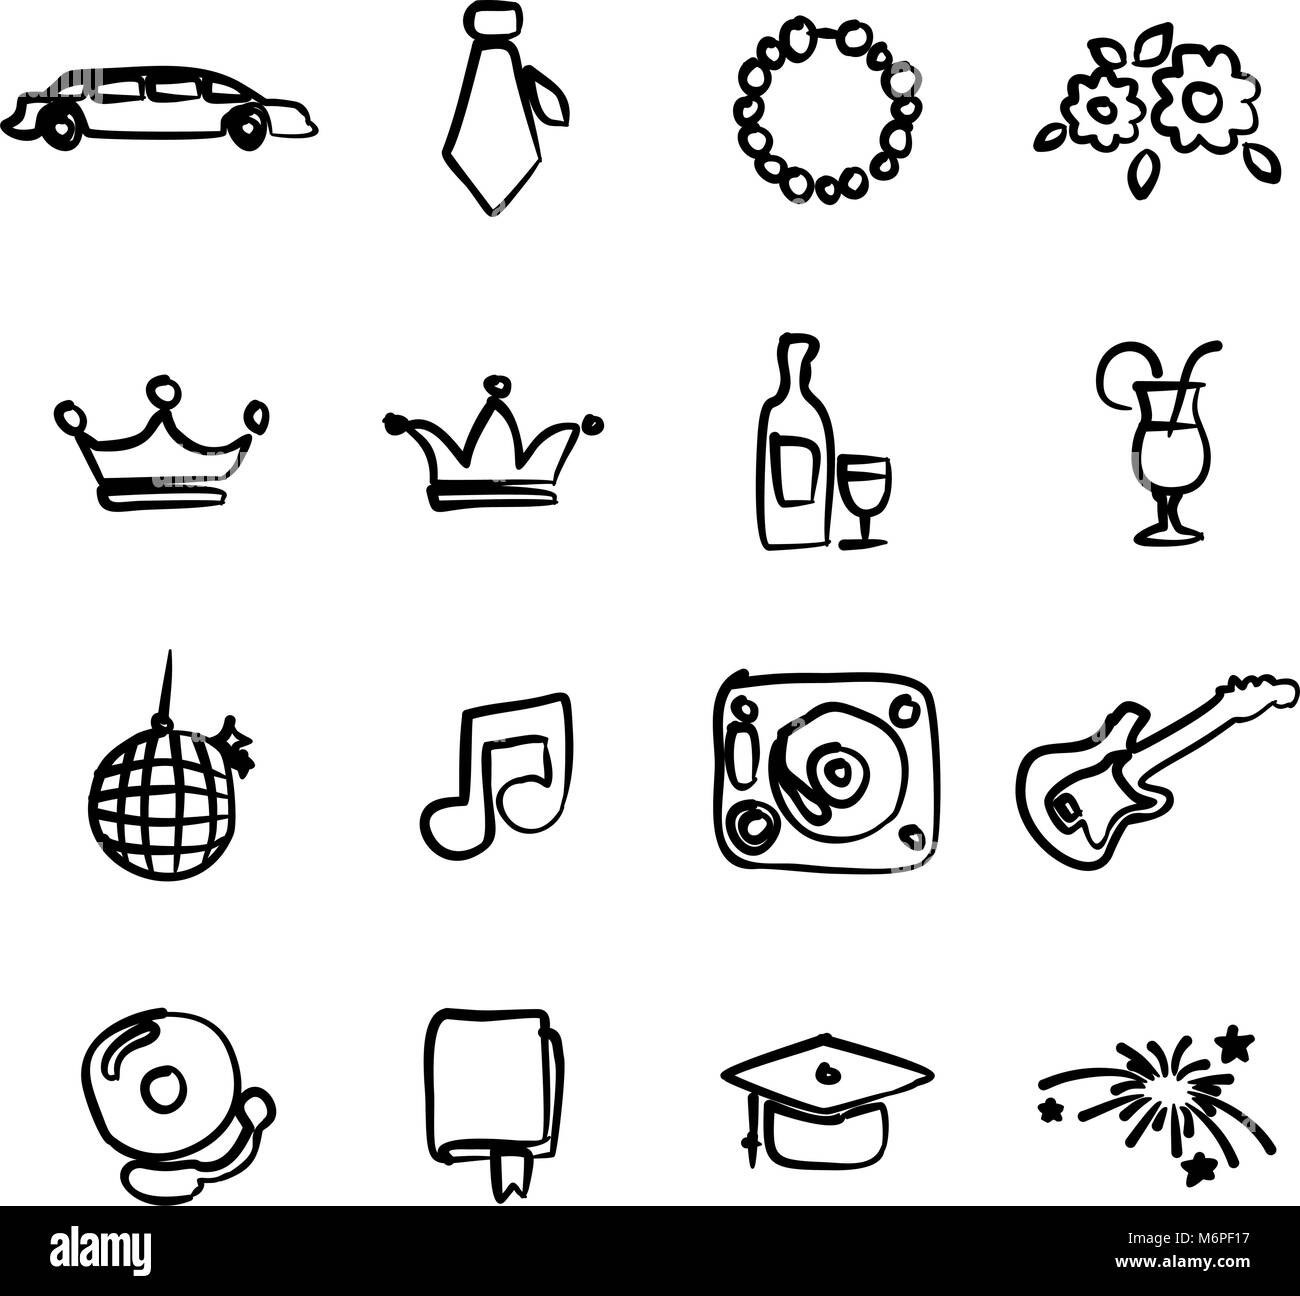 Prom Icons Freehand Stock Vector